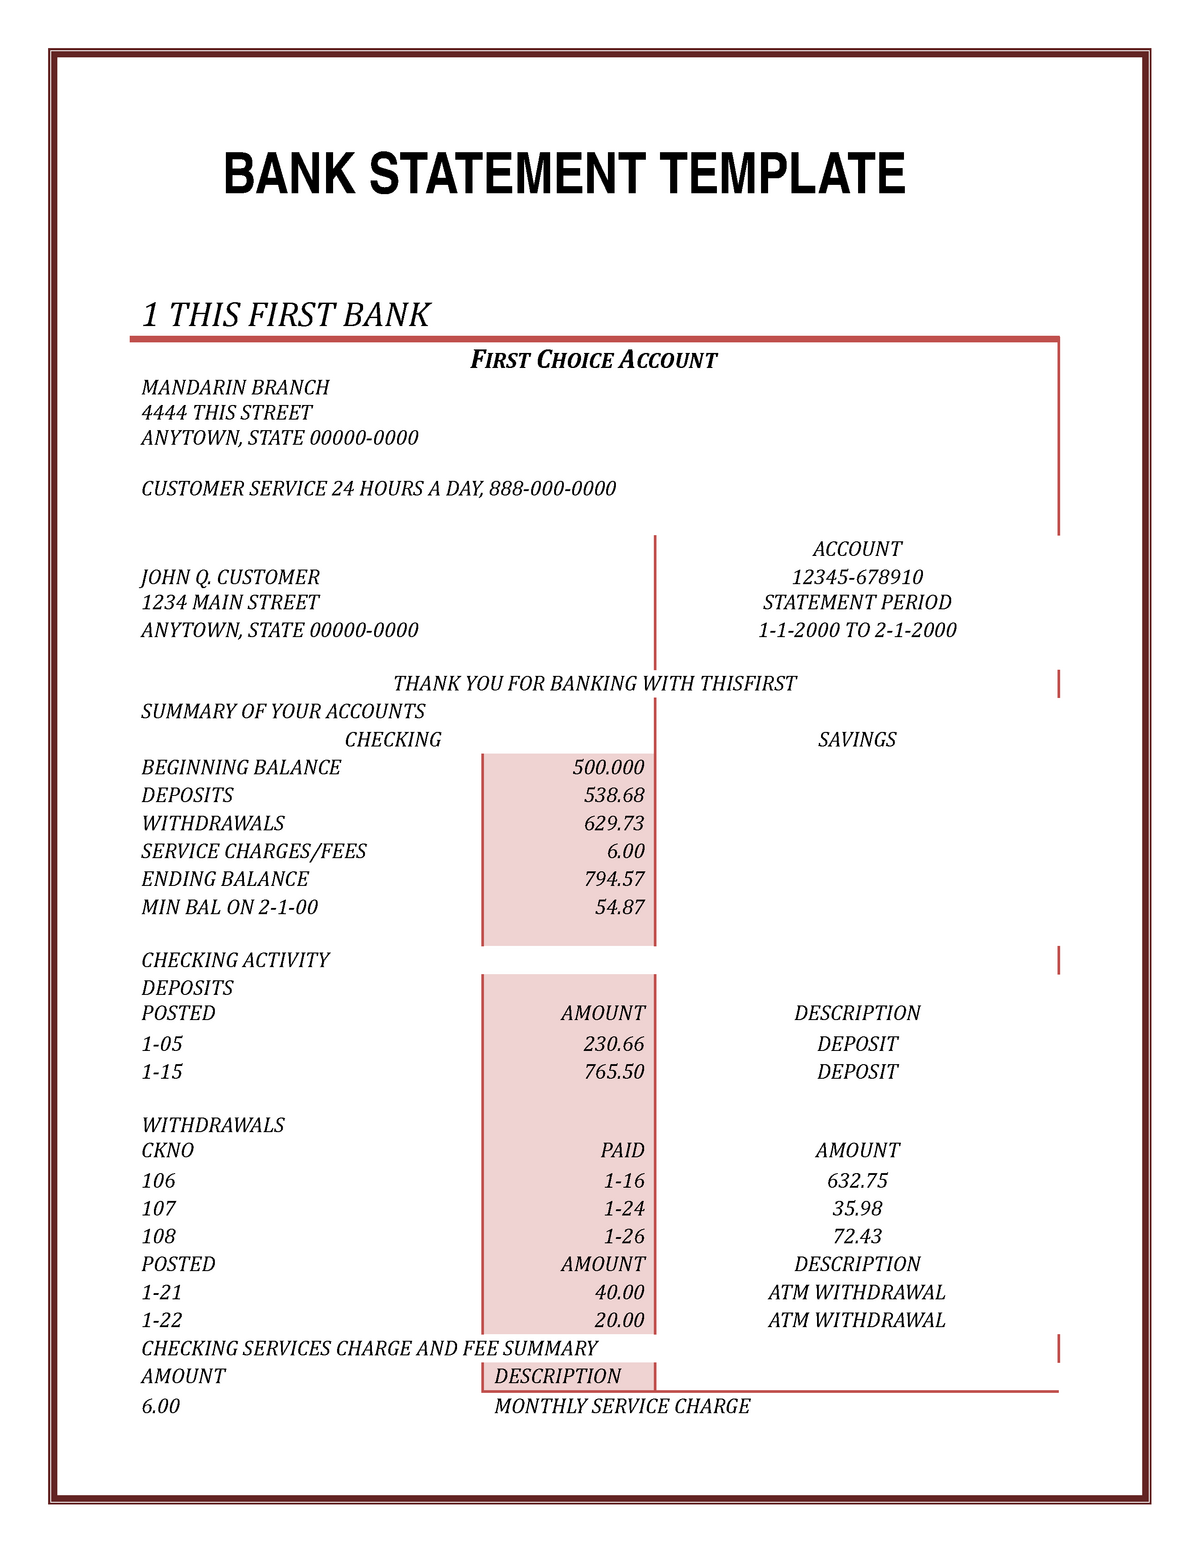 Bank statement template 16 BANK STATEMENT TEMPLATE 1 THIS FIRST BANK